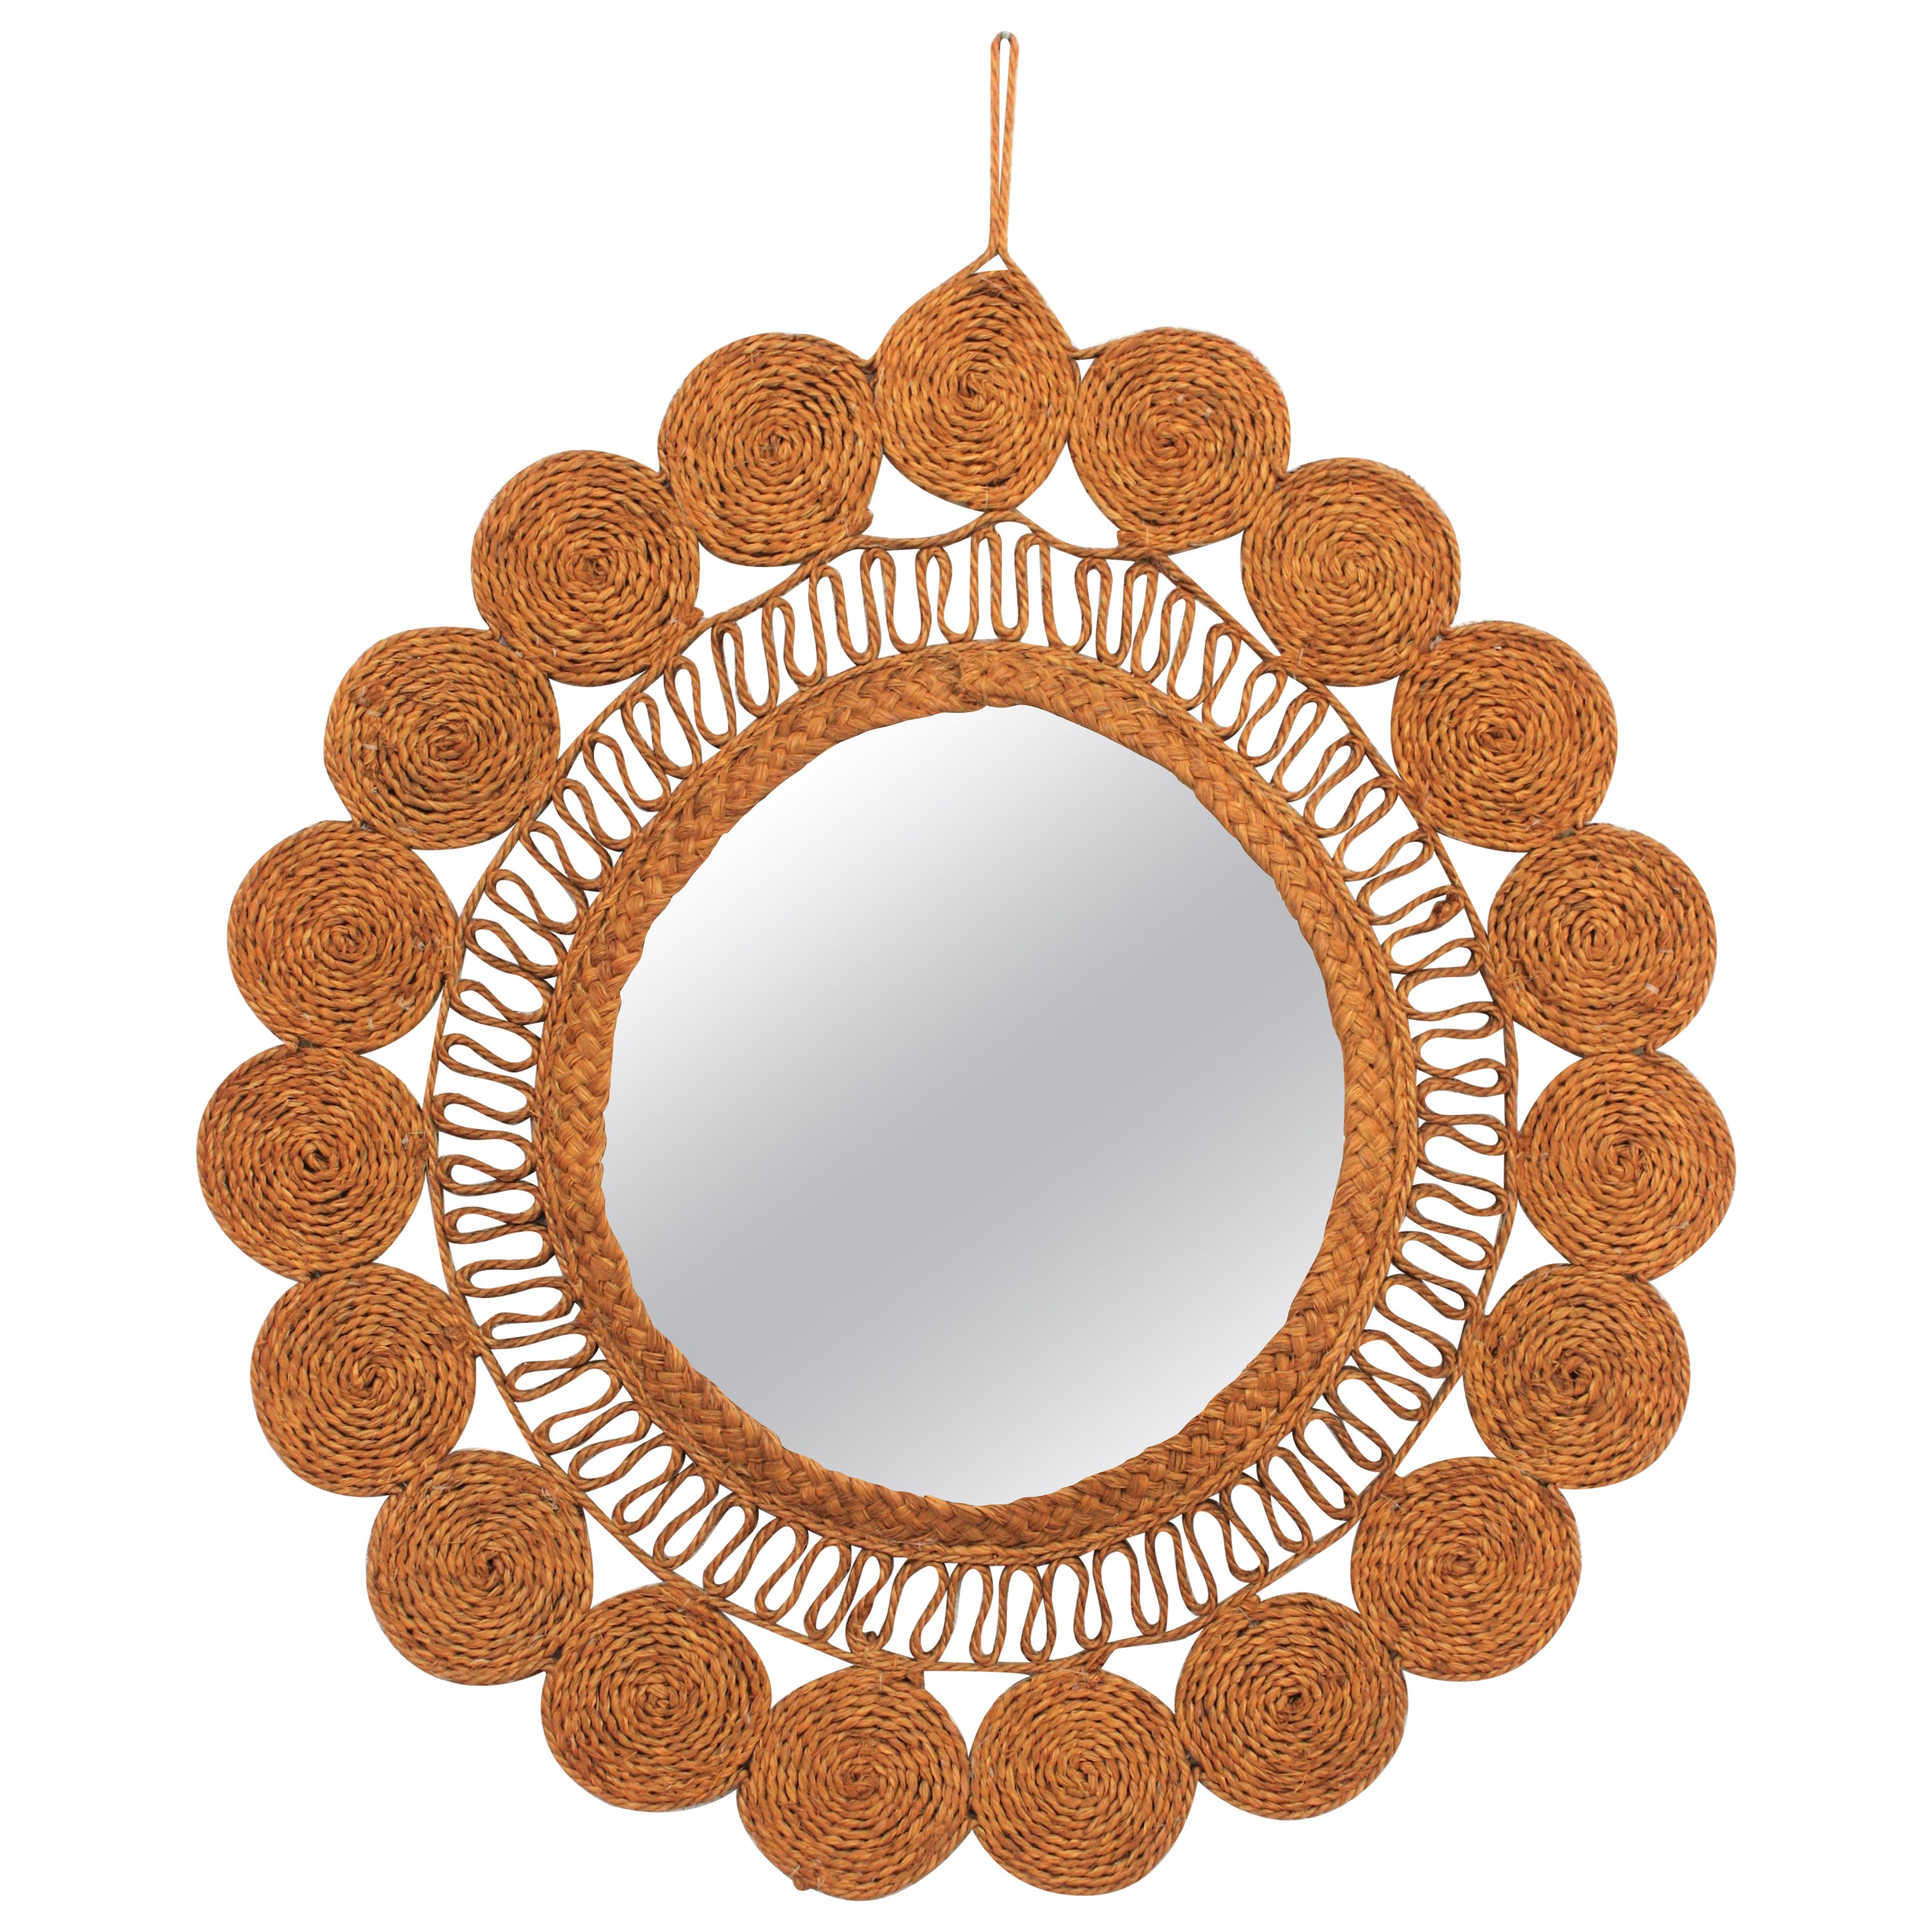 Woven Esparto Rope Wall Mirror, Spain, 1960s For Sale